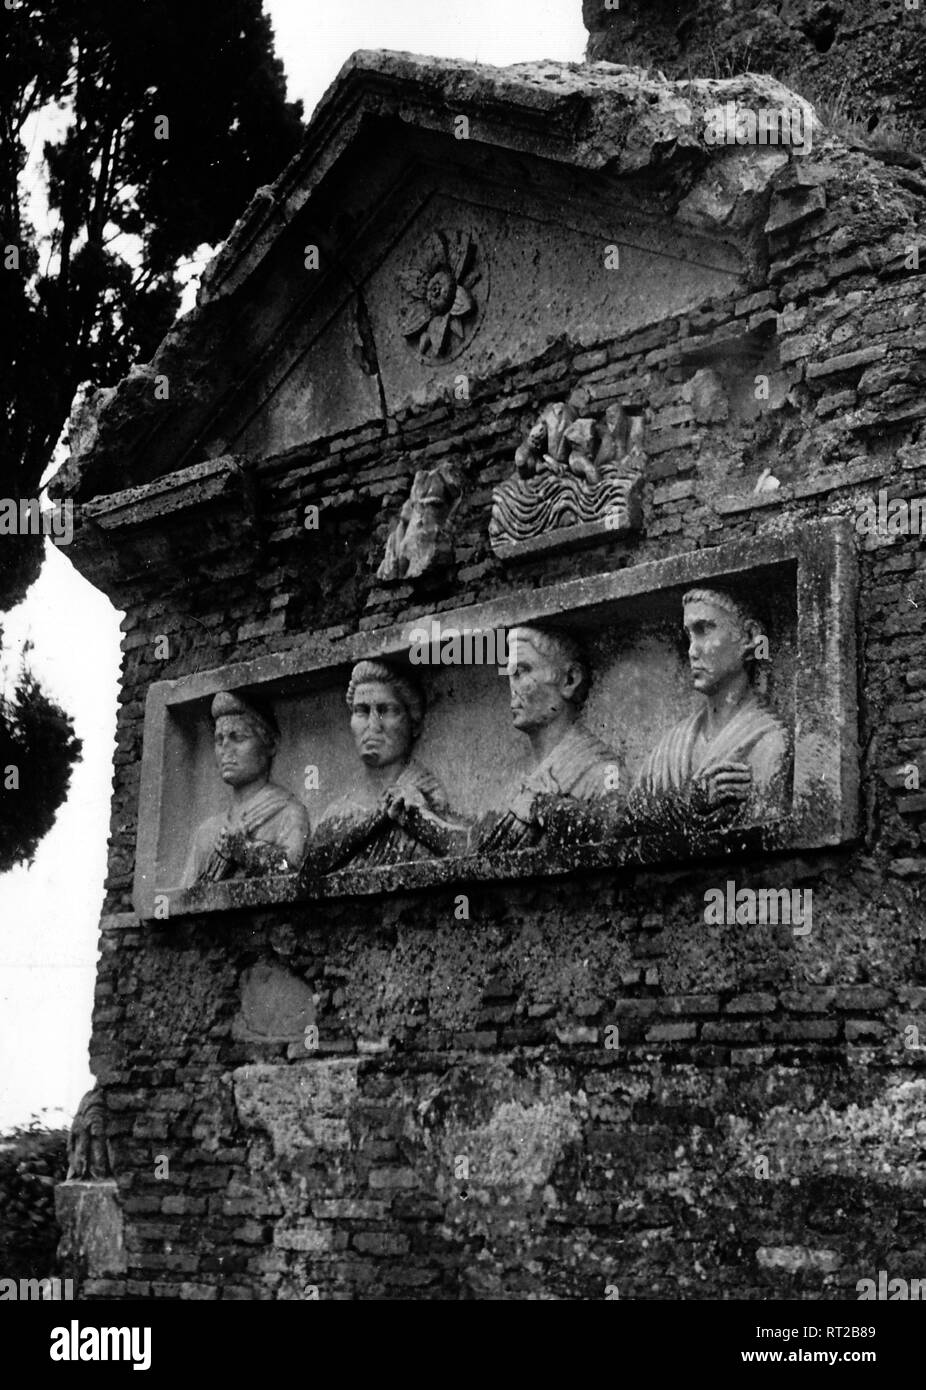 Travel to Rome - Italy in 1950s - Latin tomb, Via Appia Antica near Rome. Antike Gruft mit Grabplatte bei Rom, Italien. Image taken in 1954 by Erich Andres Stock Photo